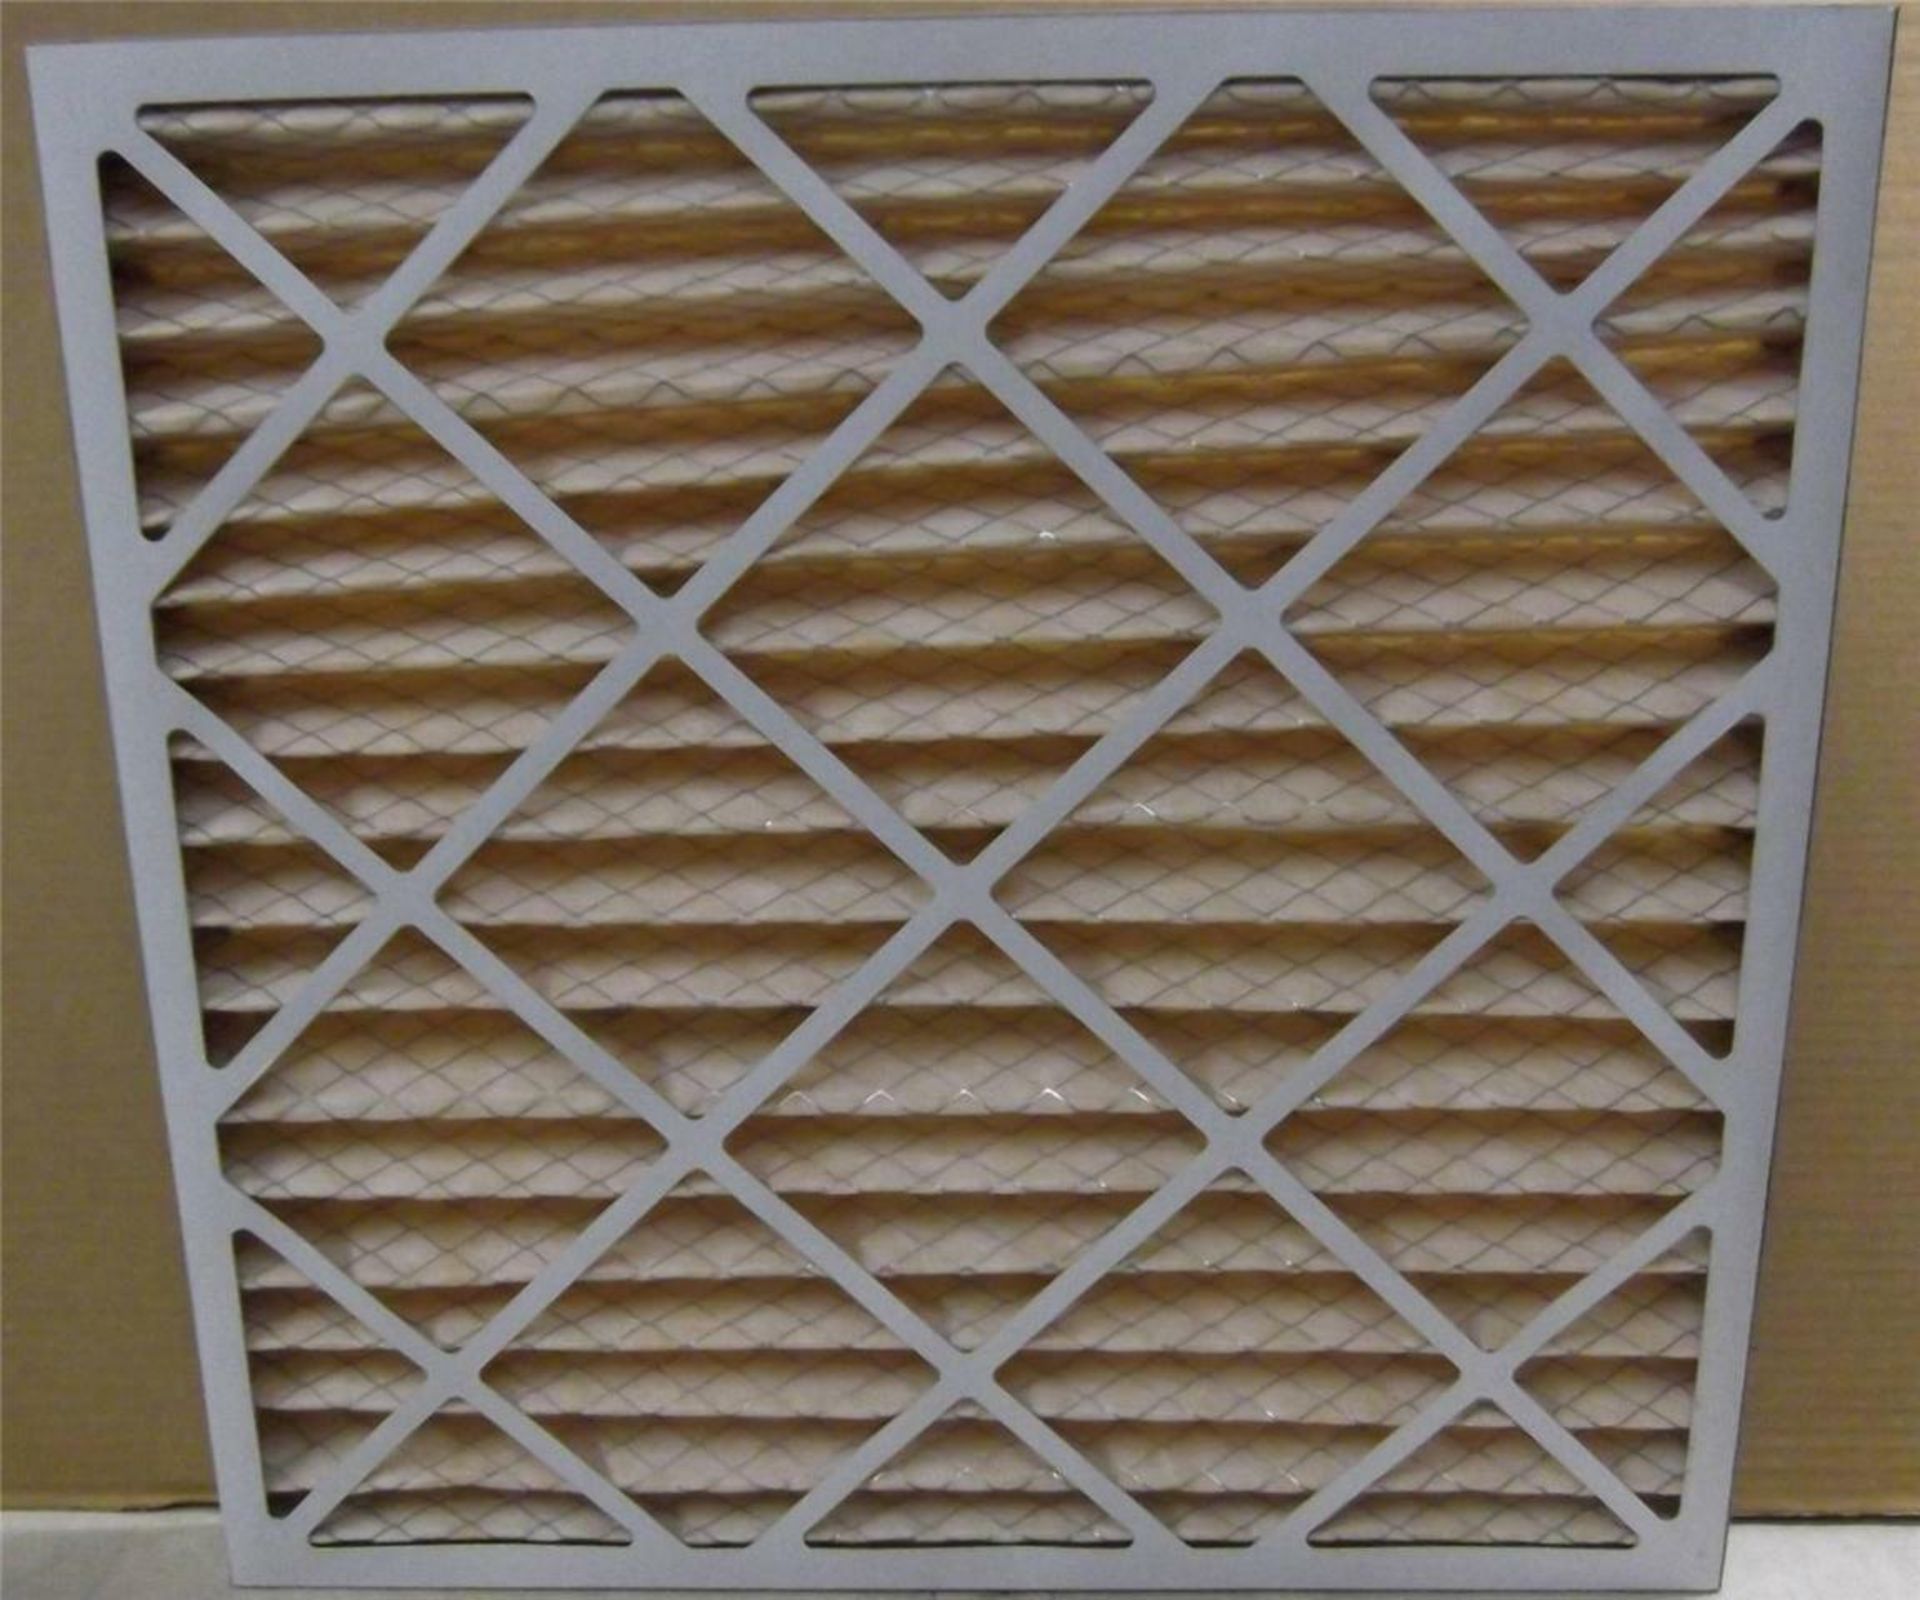 Koch Merv 11 Pleated Air Filter 24x24x2 Case of 12, 2 Cases - Image 3 of 3